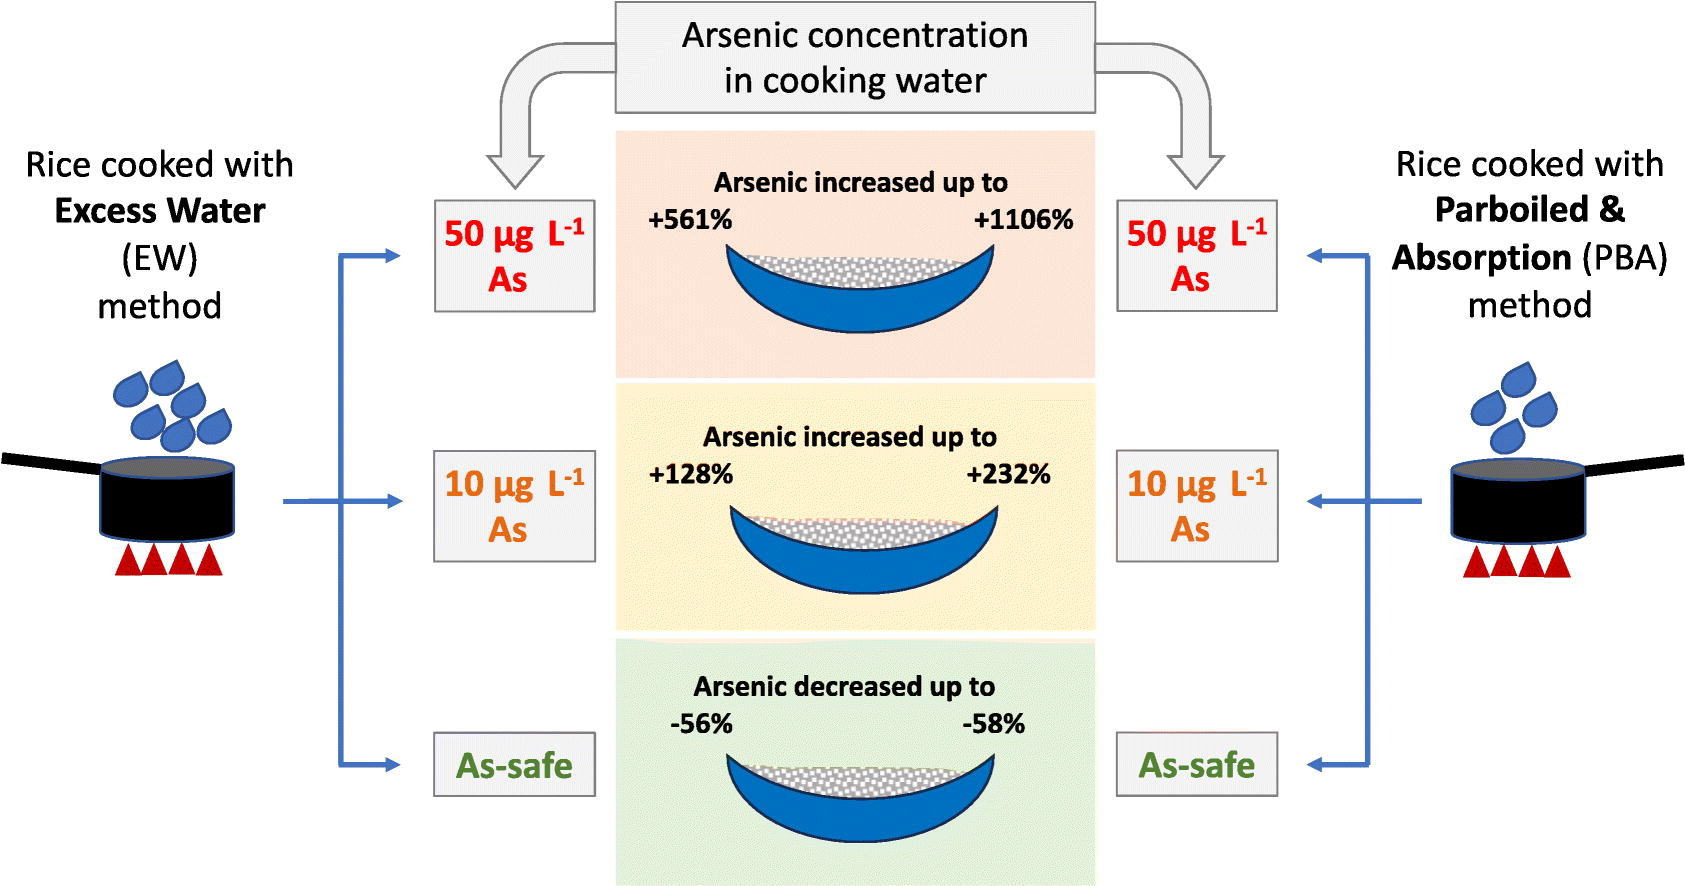 Articolo “A comparison of the effects of two cooking methods on arsenic species and nutrient elements in rice” 2024 Science of The Total Environment